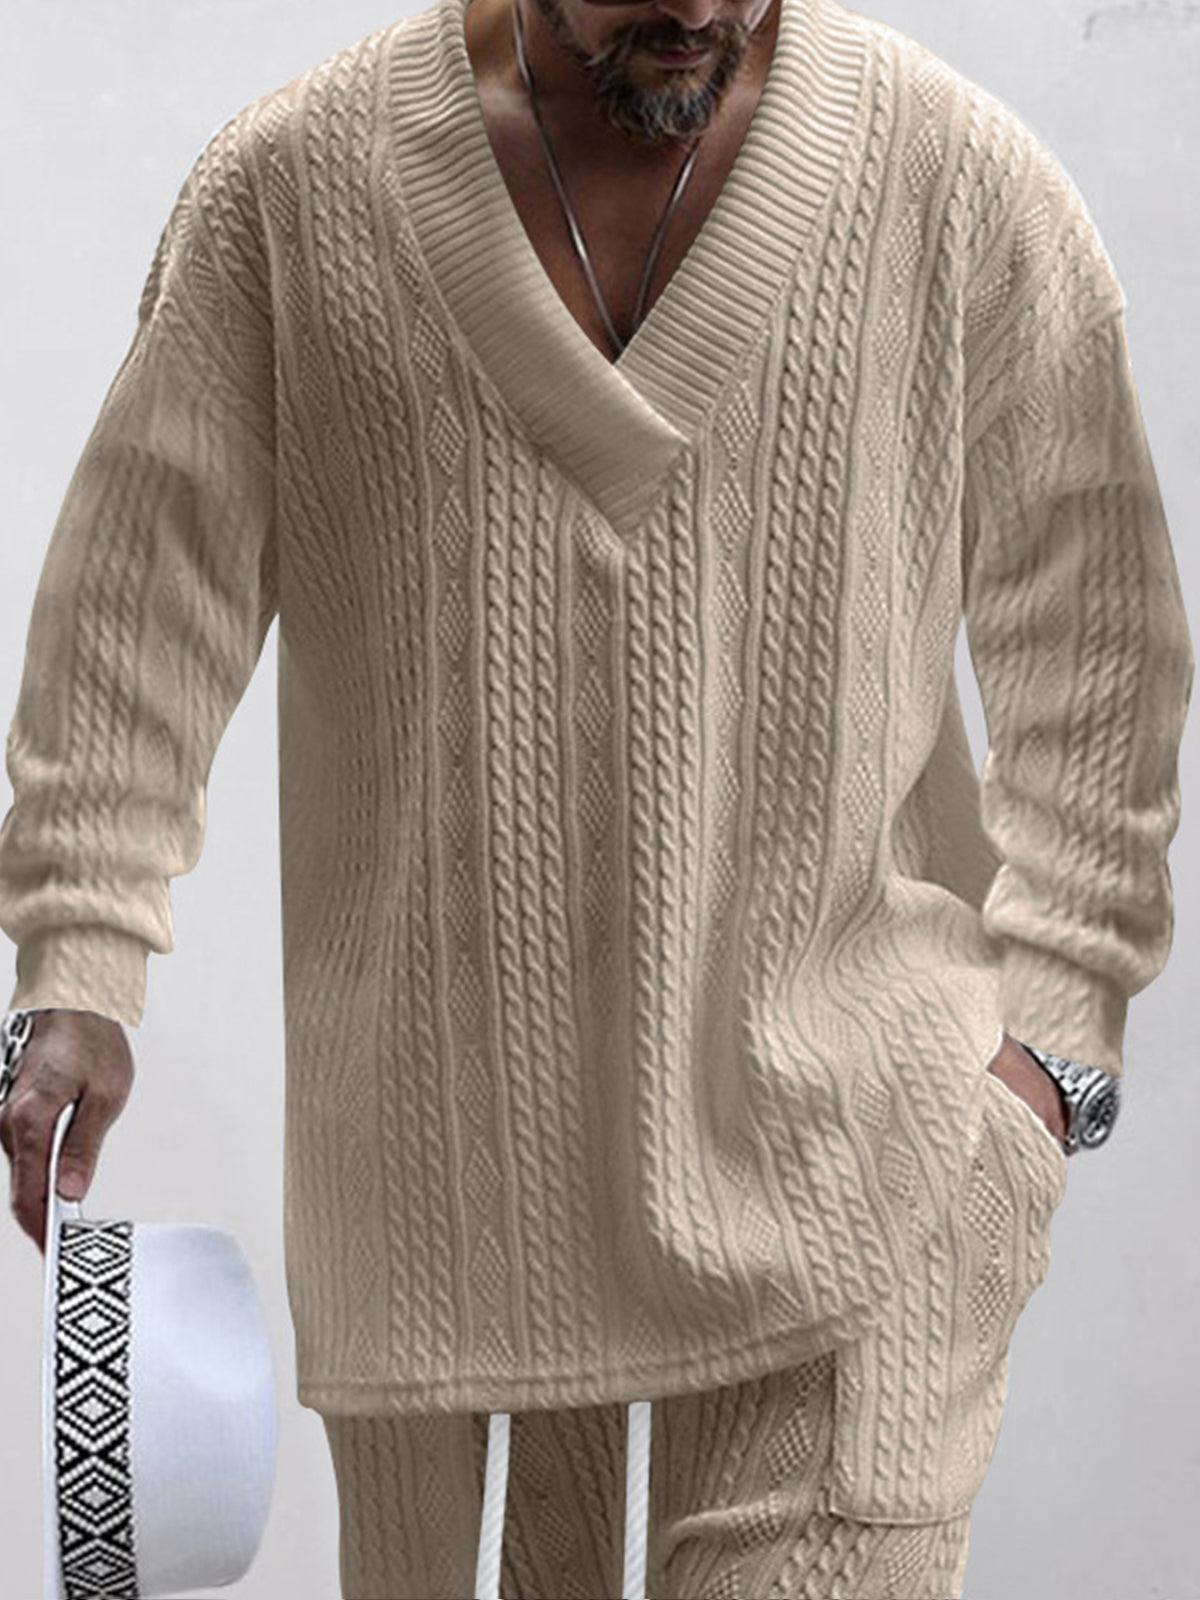 Casual Jacquard Loose Knitted Solid Color V-Neck Long Sleeve Men's Top